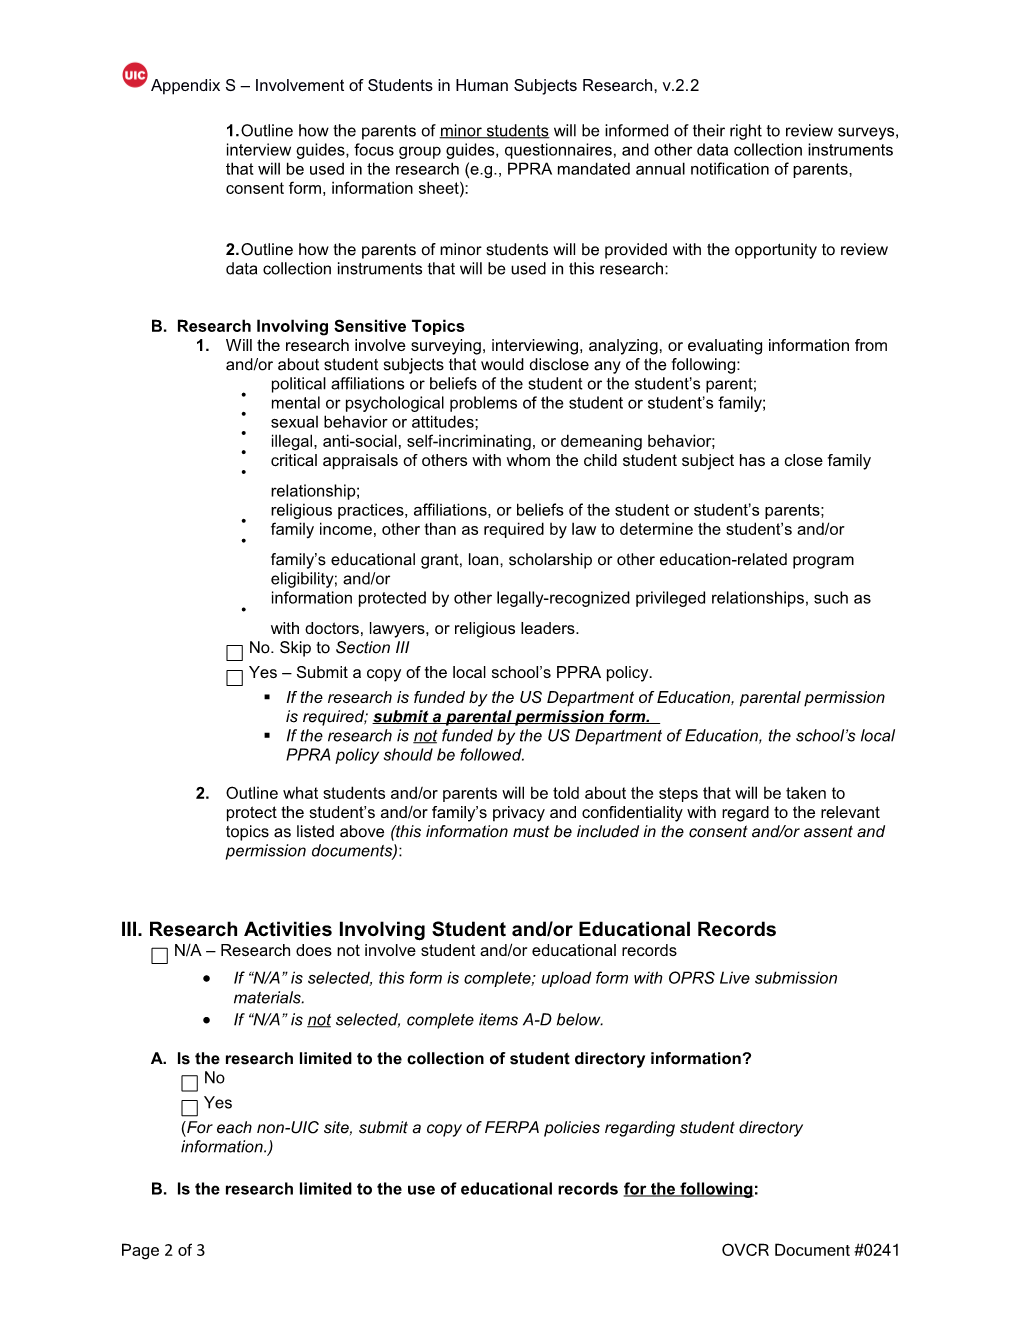 Appendix S Involvement of Students in Human Subjects Research V.2.0